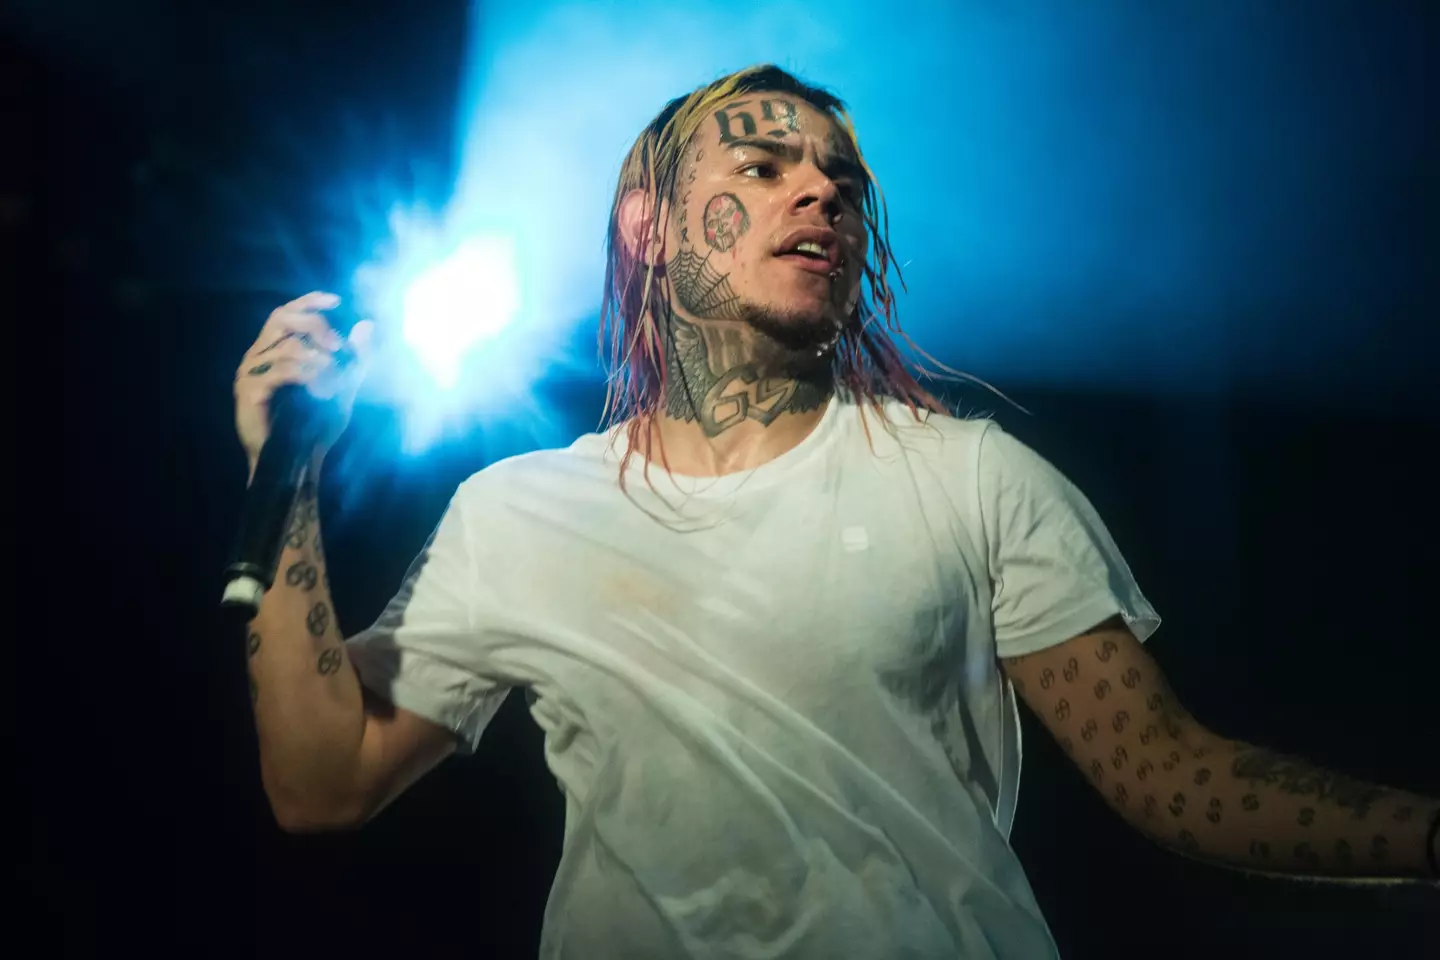 Tekashi 6ix9ine performed one song in the club before being hit.